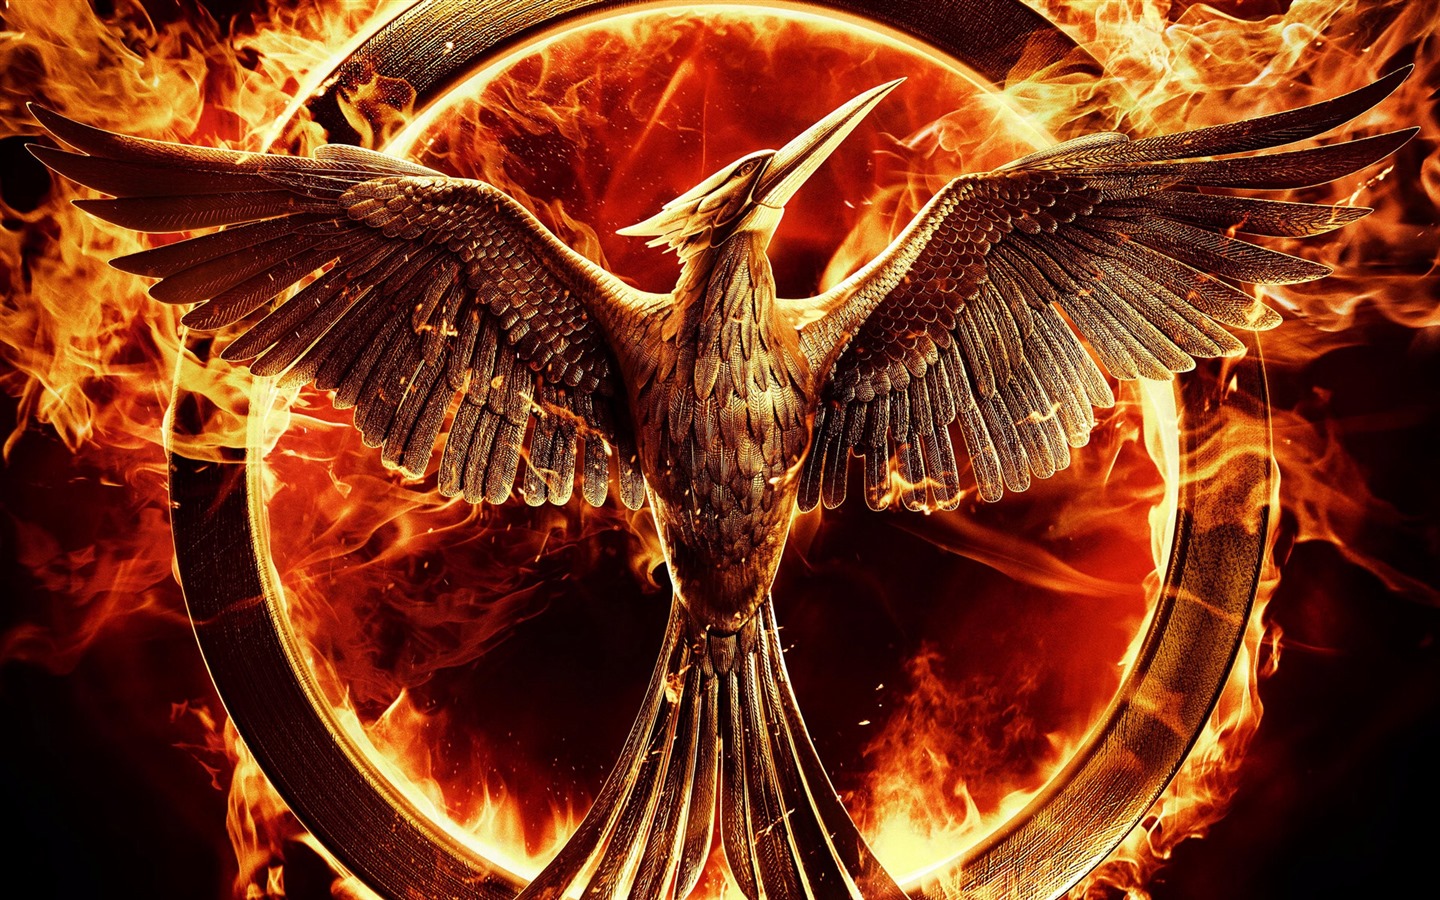 The Hunger Games: Mockingjay HD wallpapers #4 - 1440x900